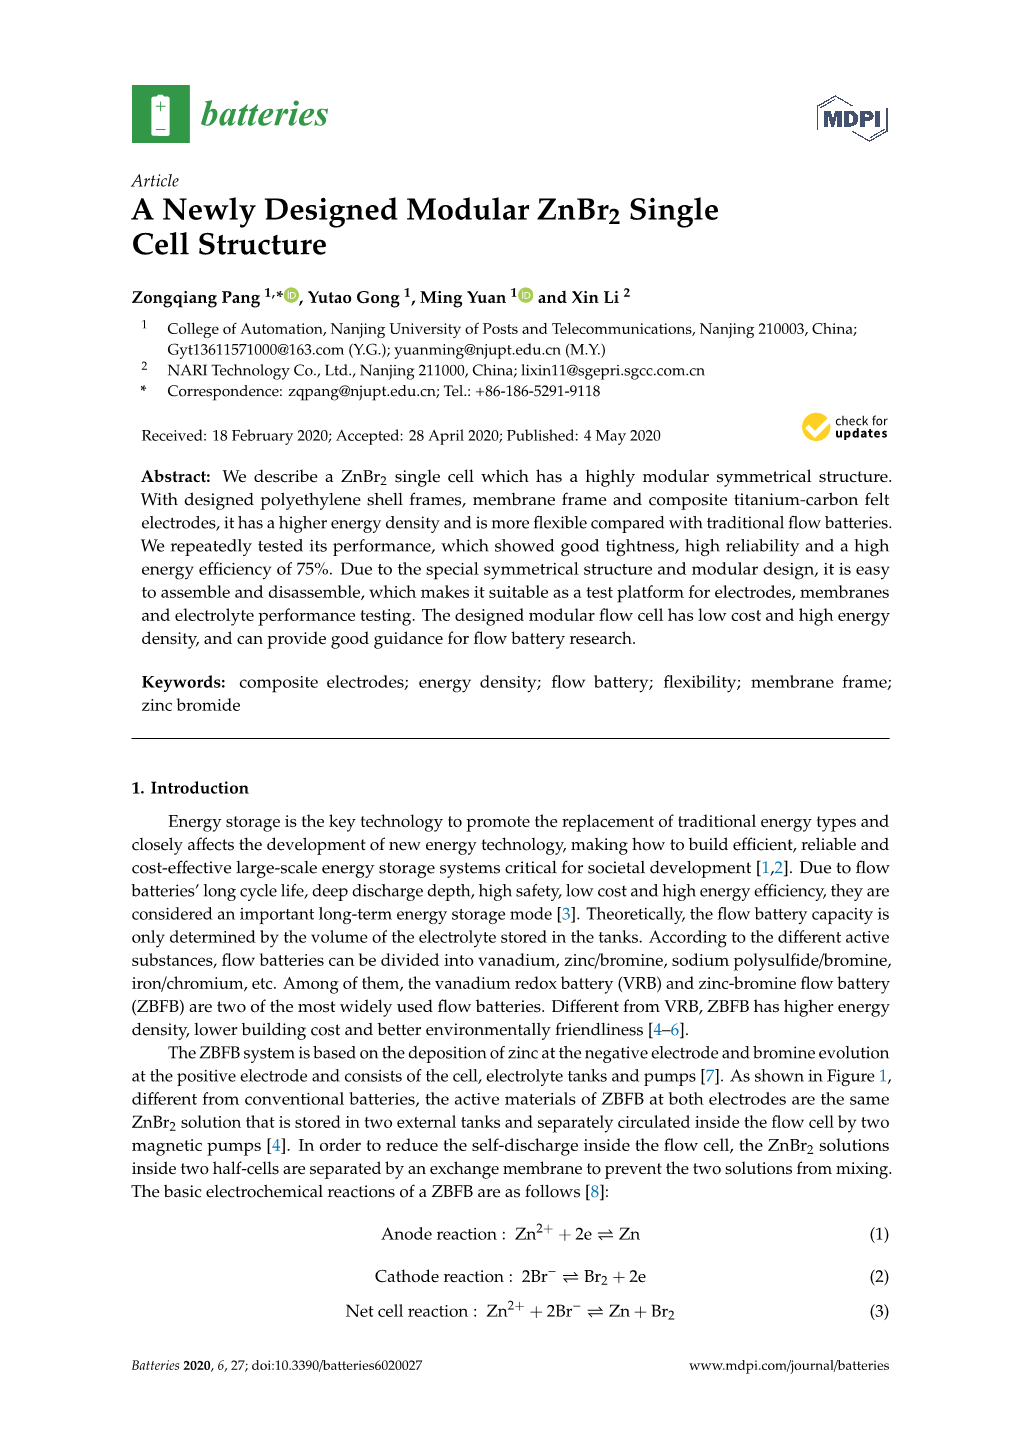 A Newly Designed Modular Znbr2 Single Cell Structure